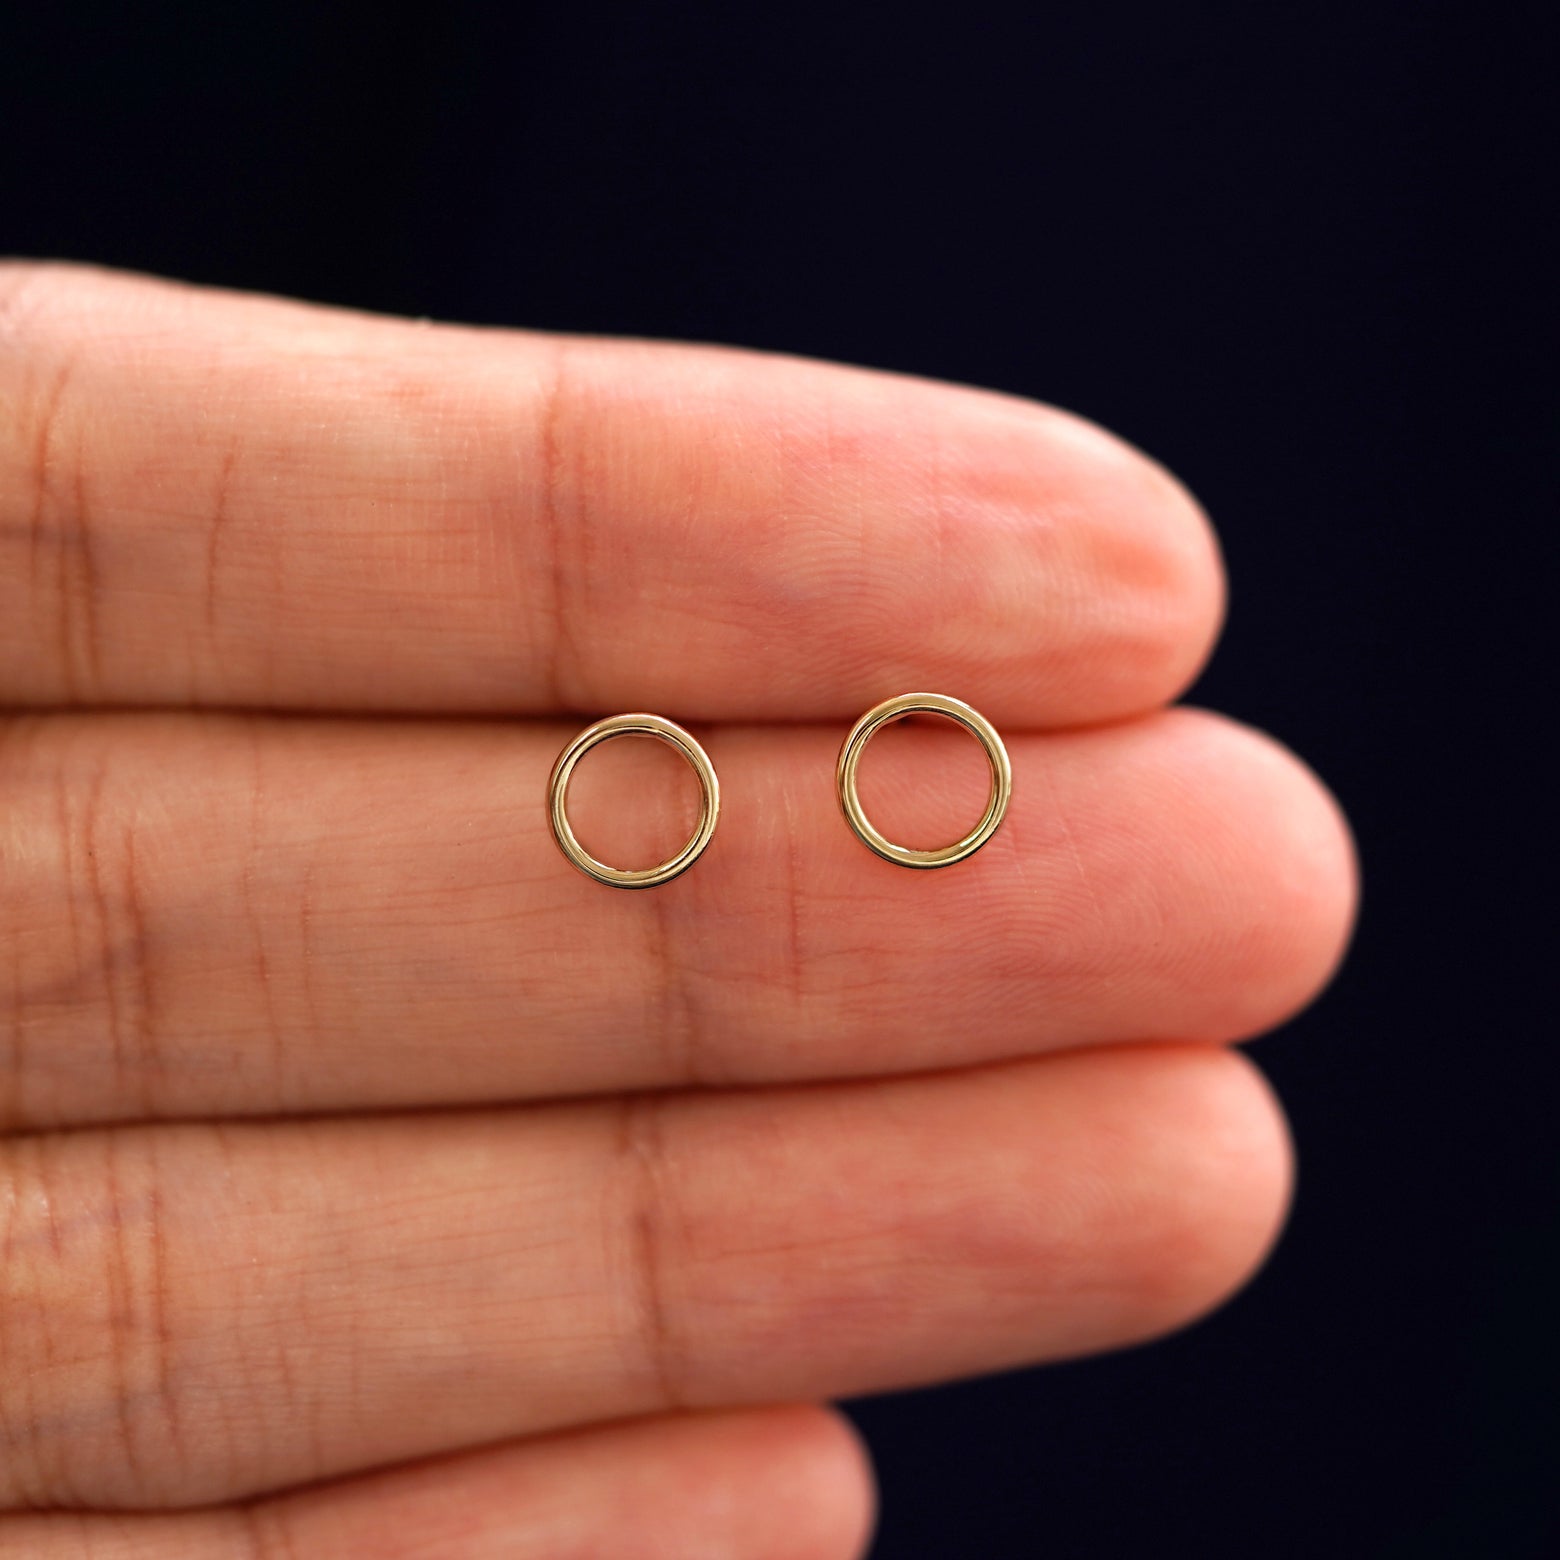 A model's hand holding a pair of recycled 14k gold Open Circle Earrings